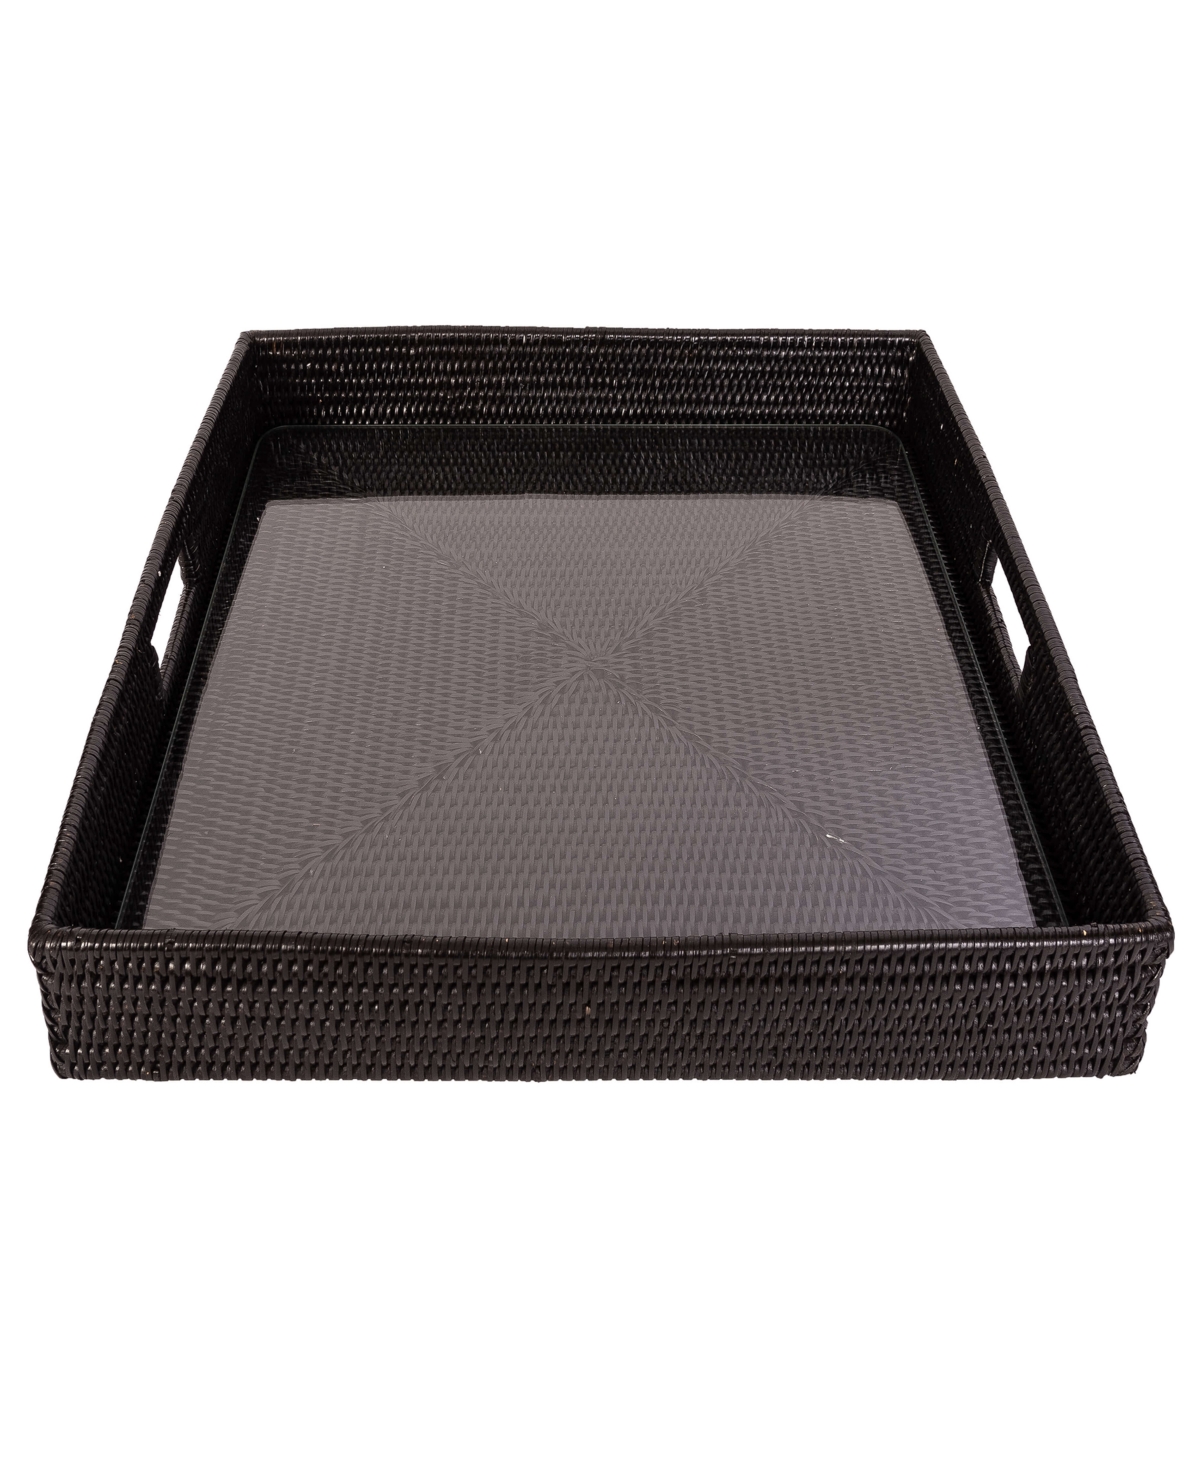 Artifacts Trading Company Artifacts Rattan Square Serving Ottoman Tray With Glass Insert In Tudor Black